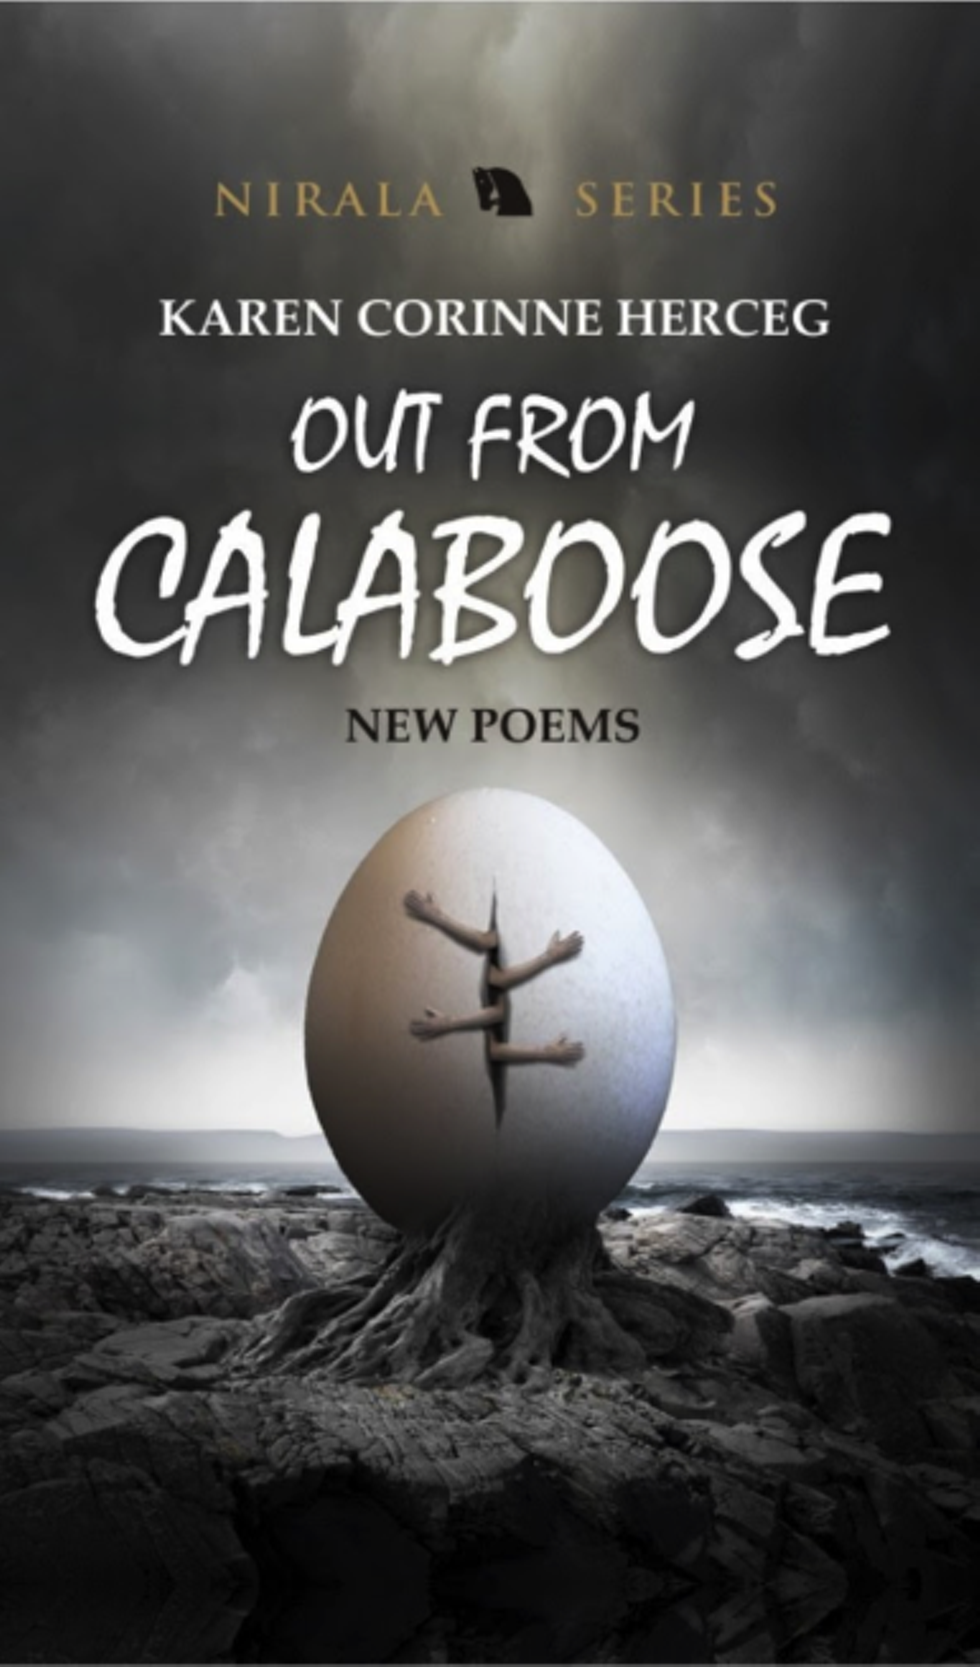 a7b34627_out_from_calaboose_cover_-_website.png